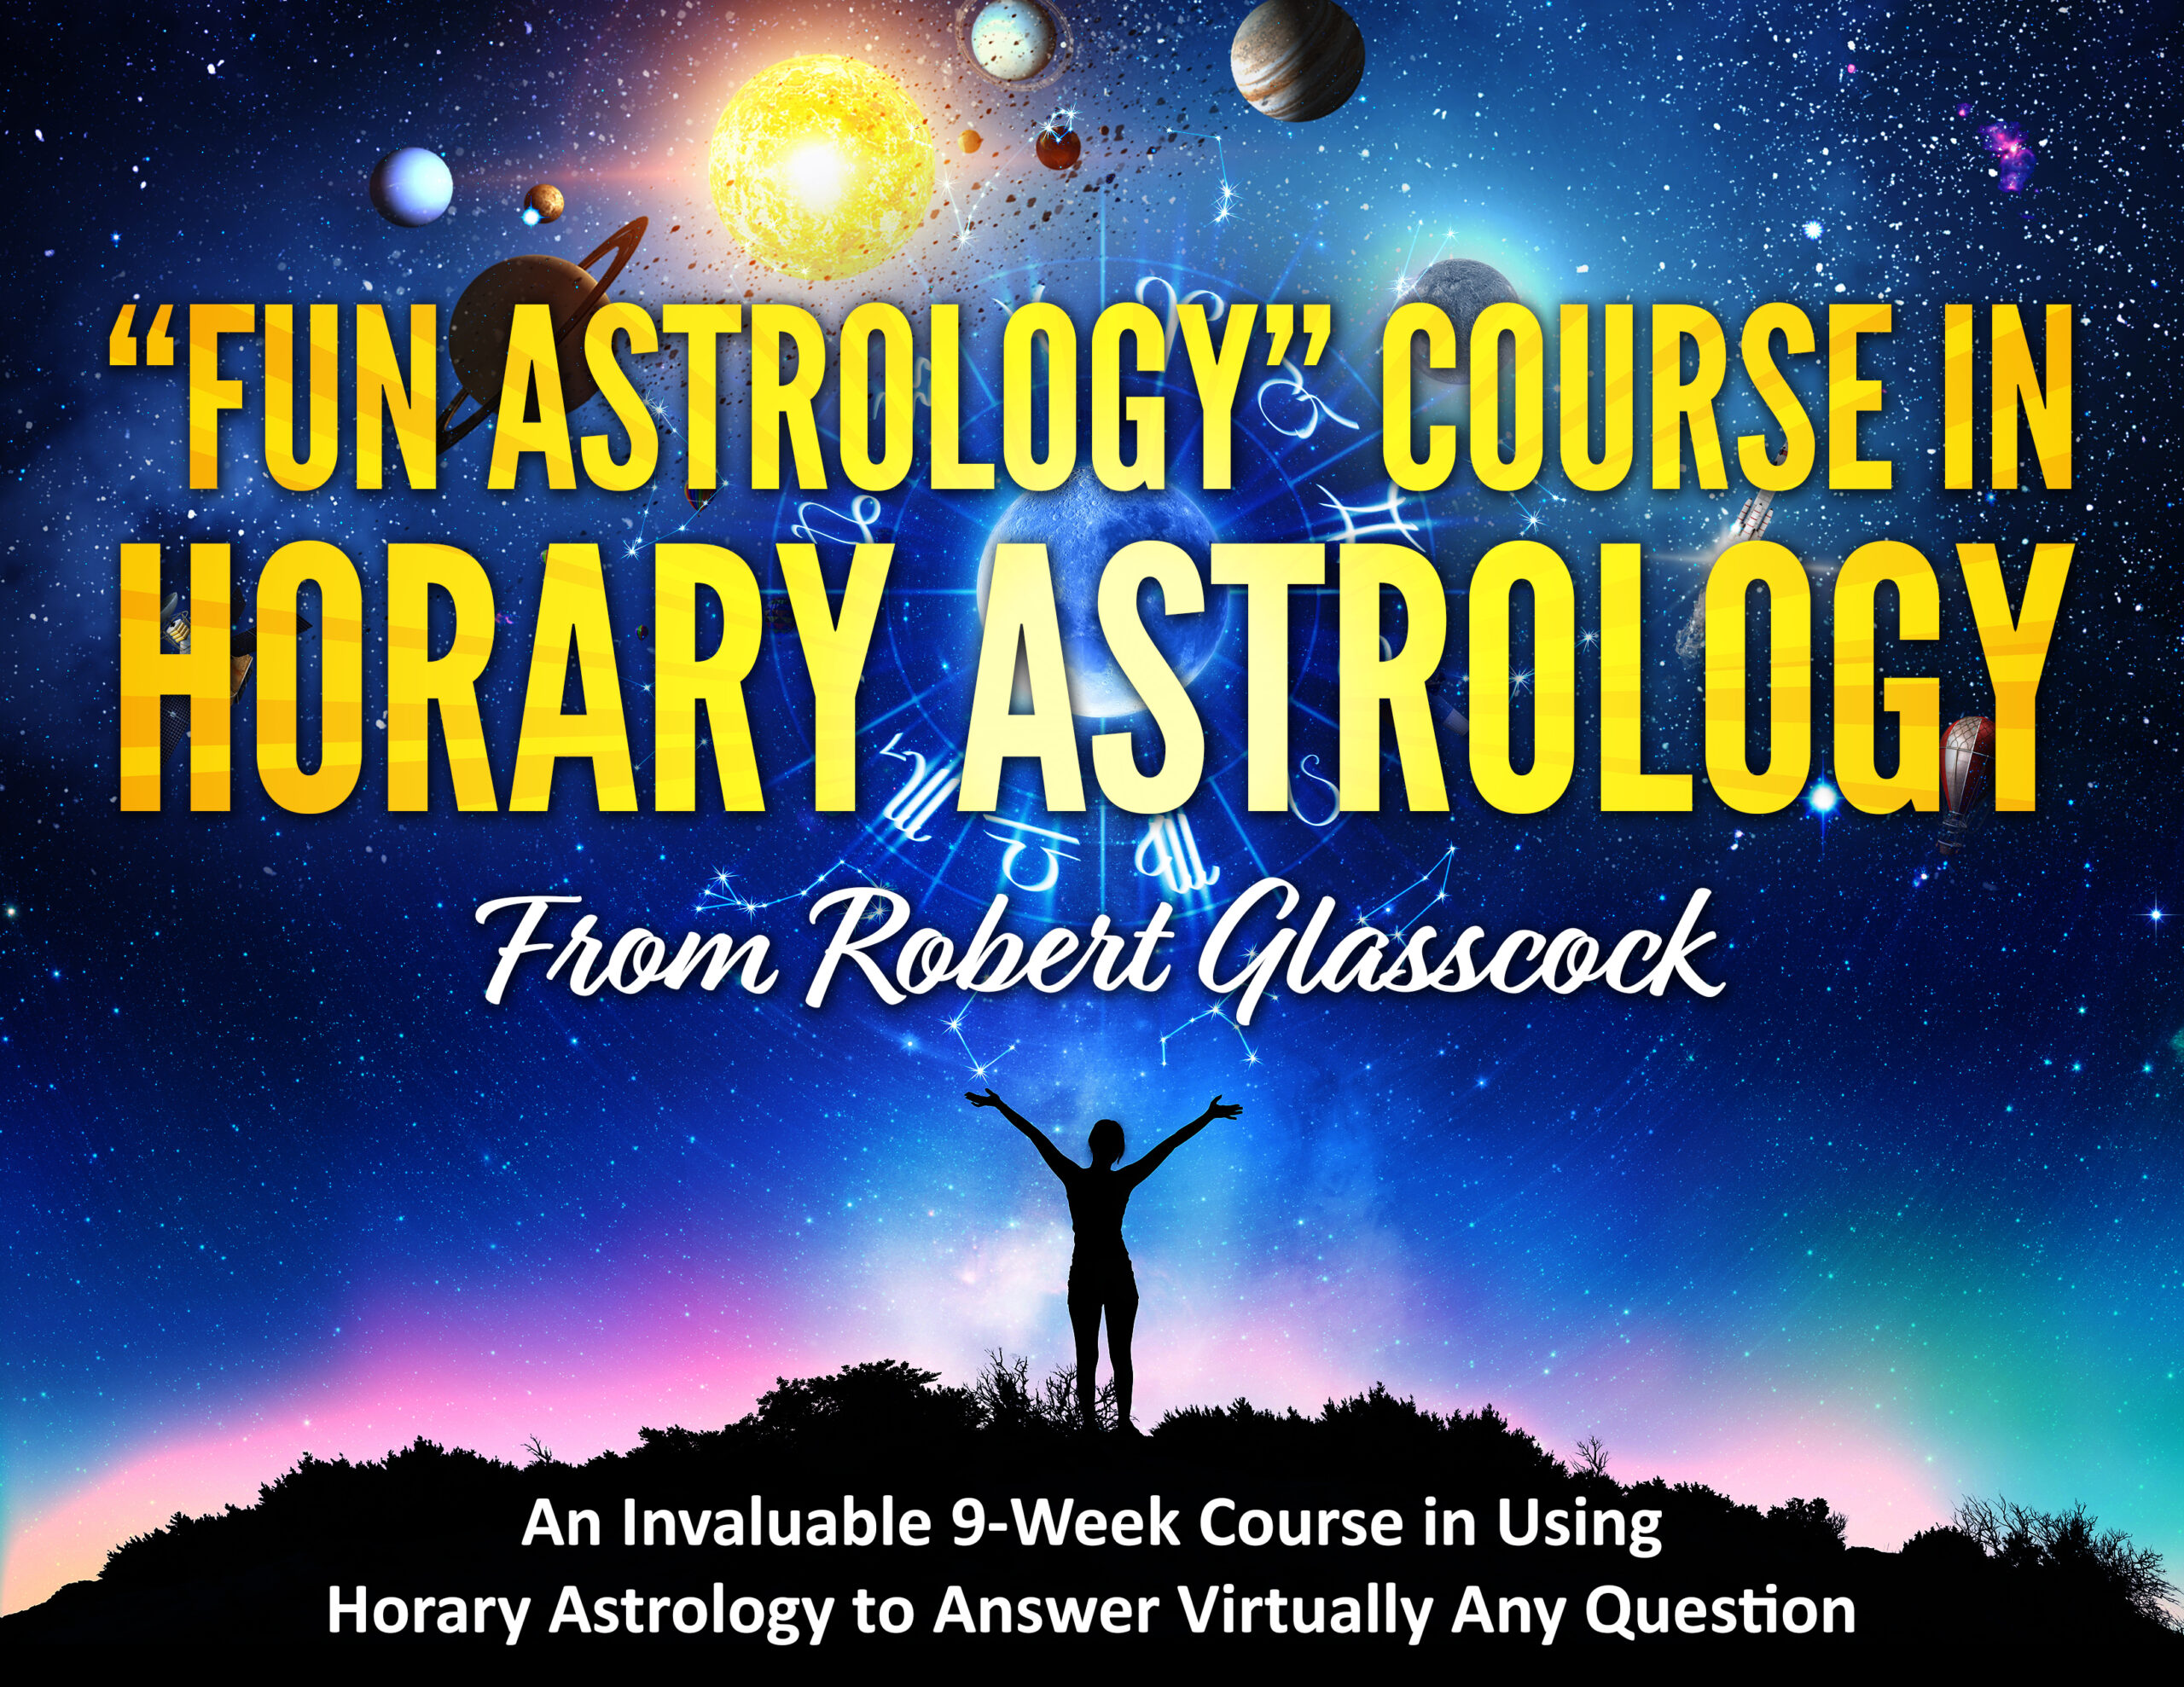 Fun Astrology’s Horary Astrology Course with Robert Glasscock